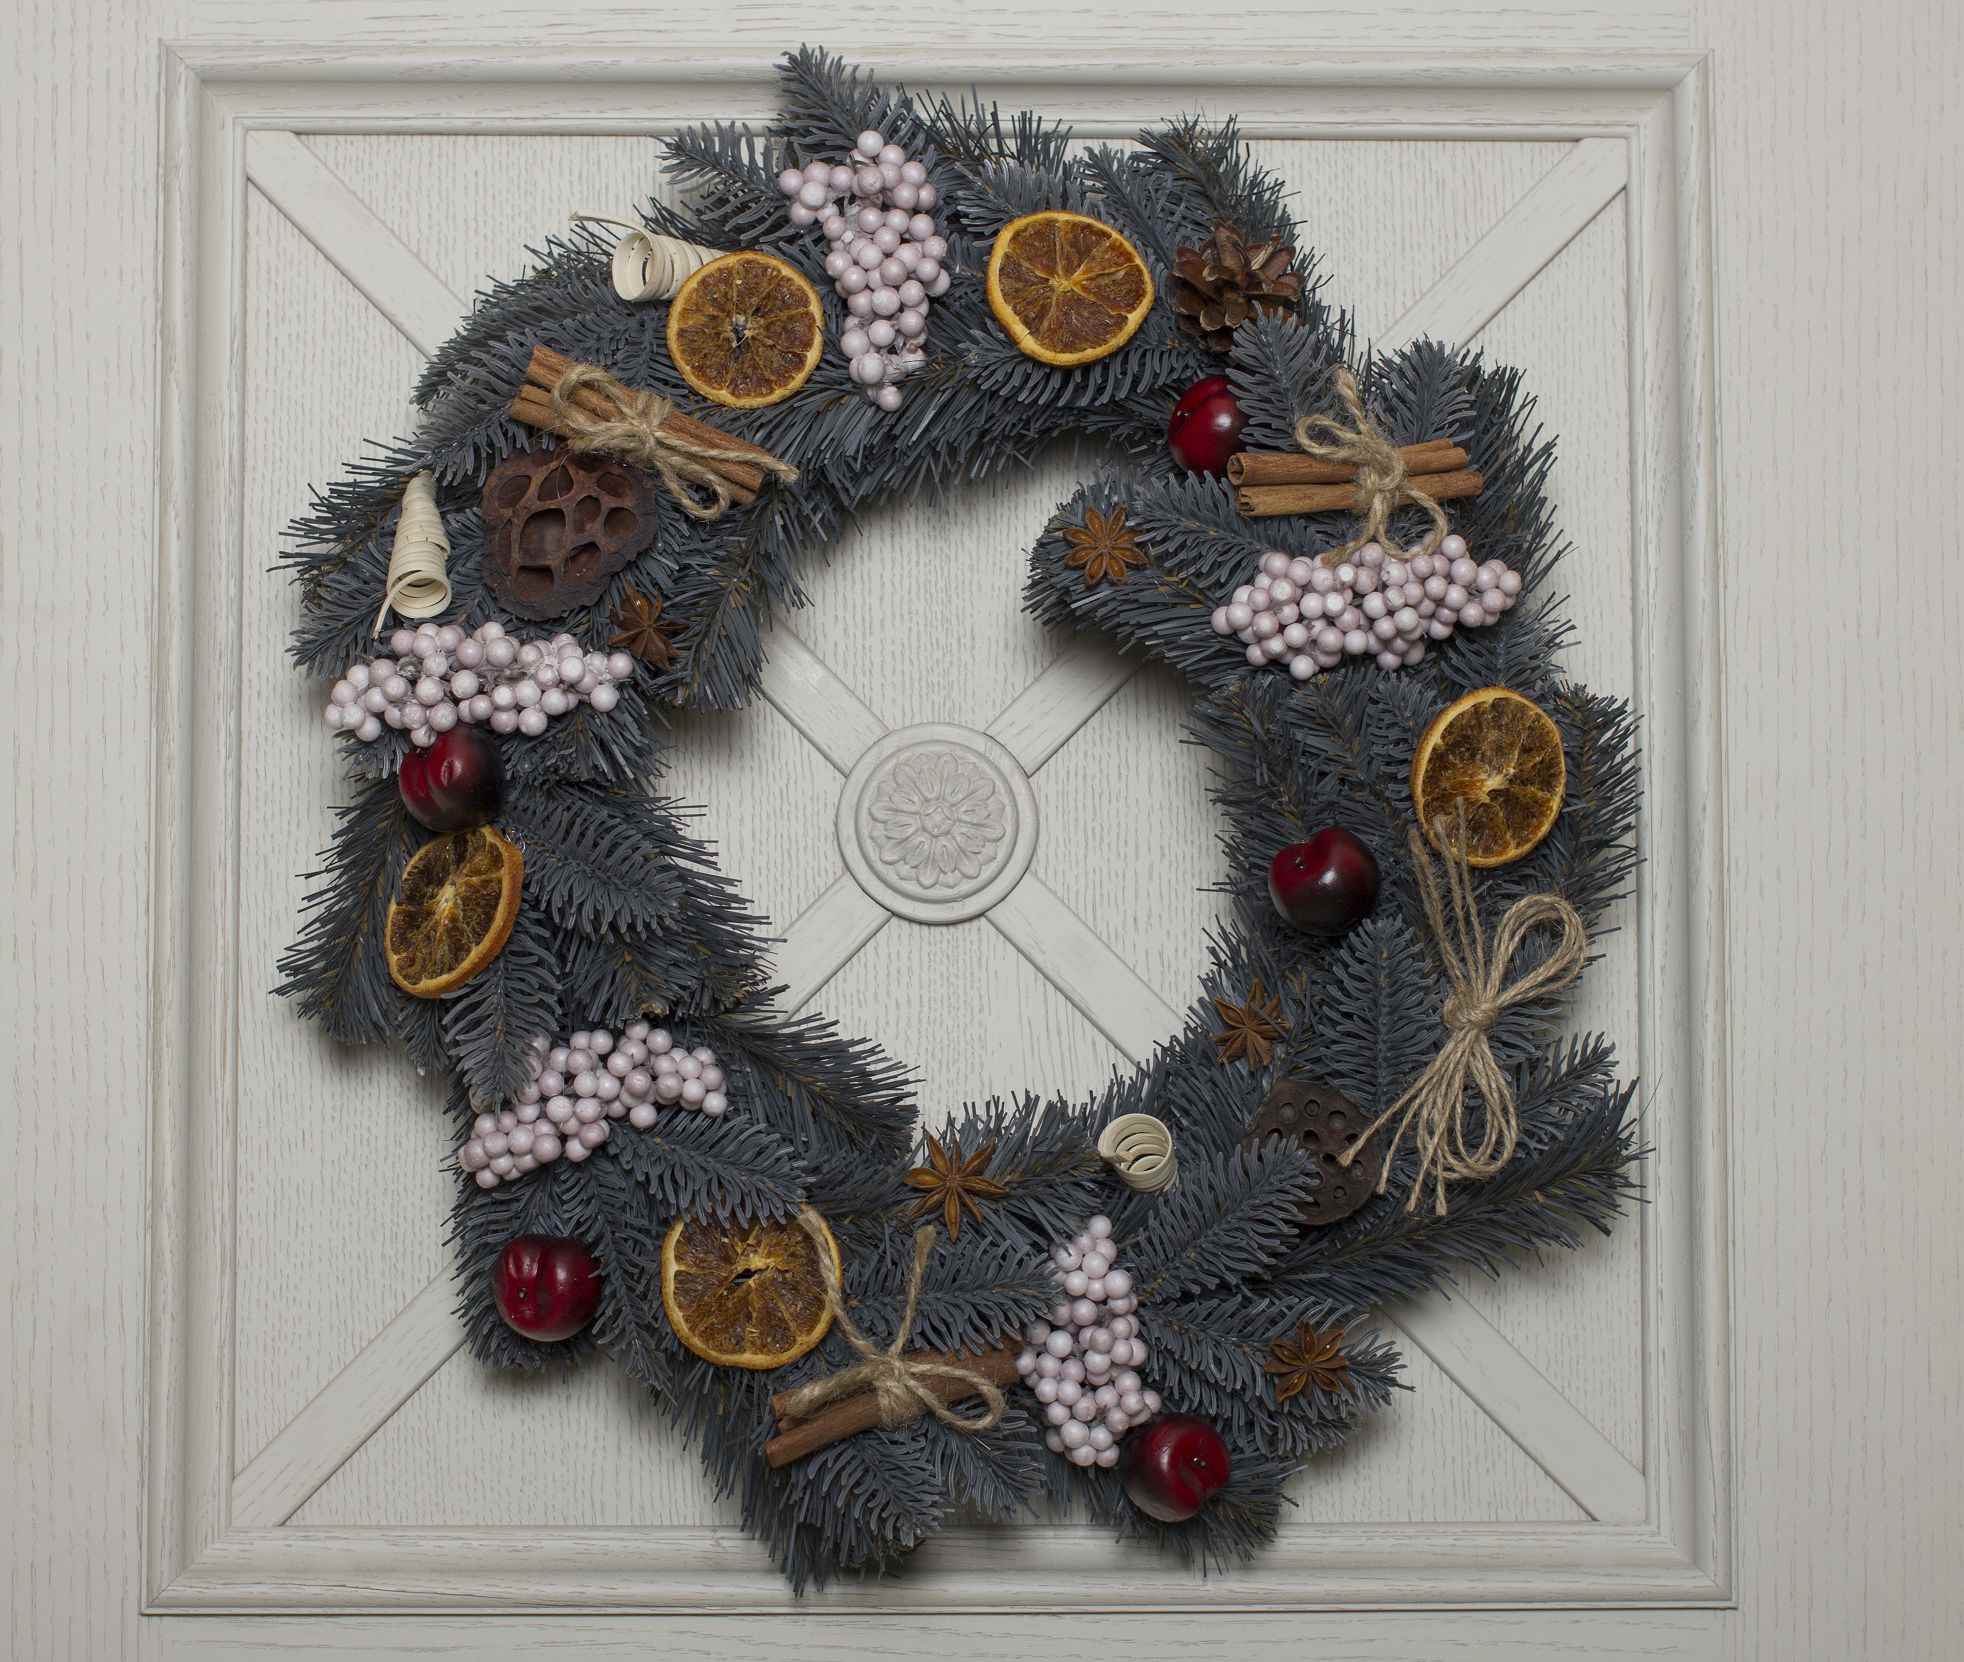 do-it-yourself version of the unusual design of a Christmas wreath